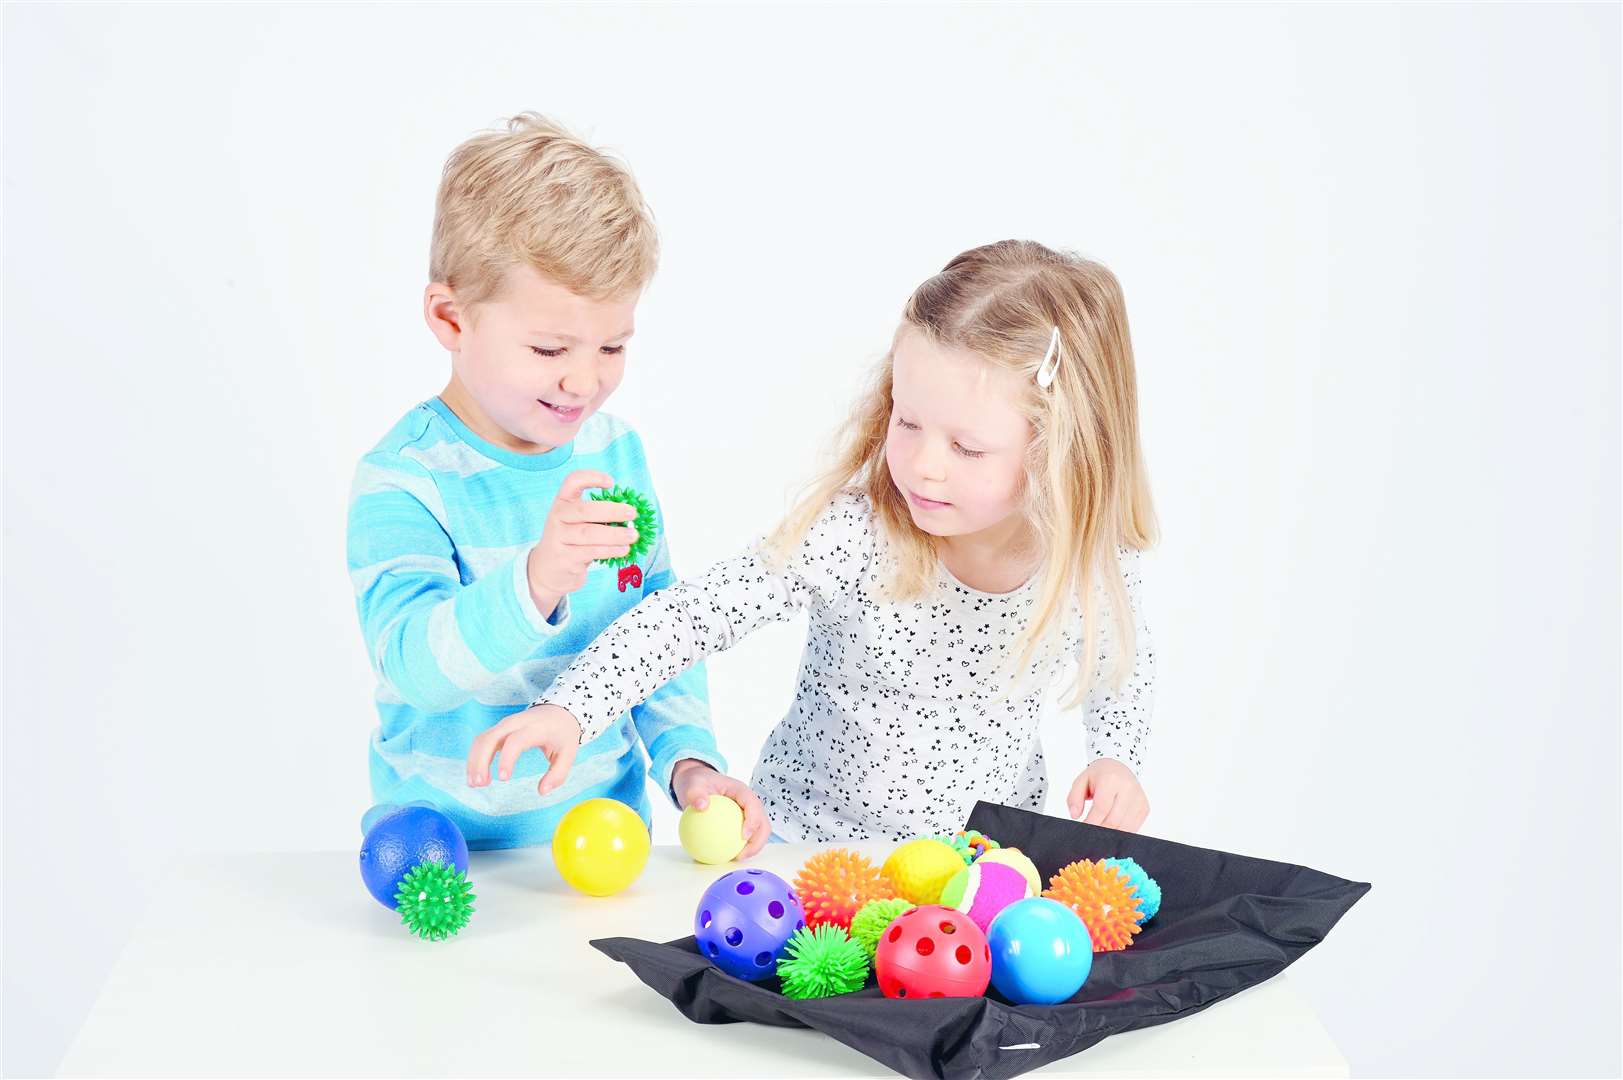 KCS says it is stocking items suitable for learning and playing at home